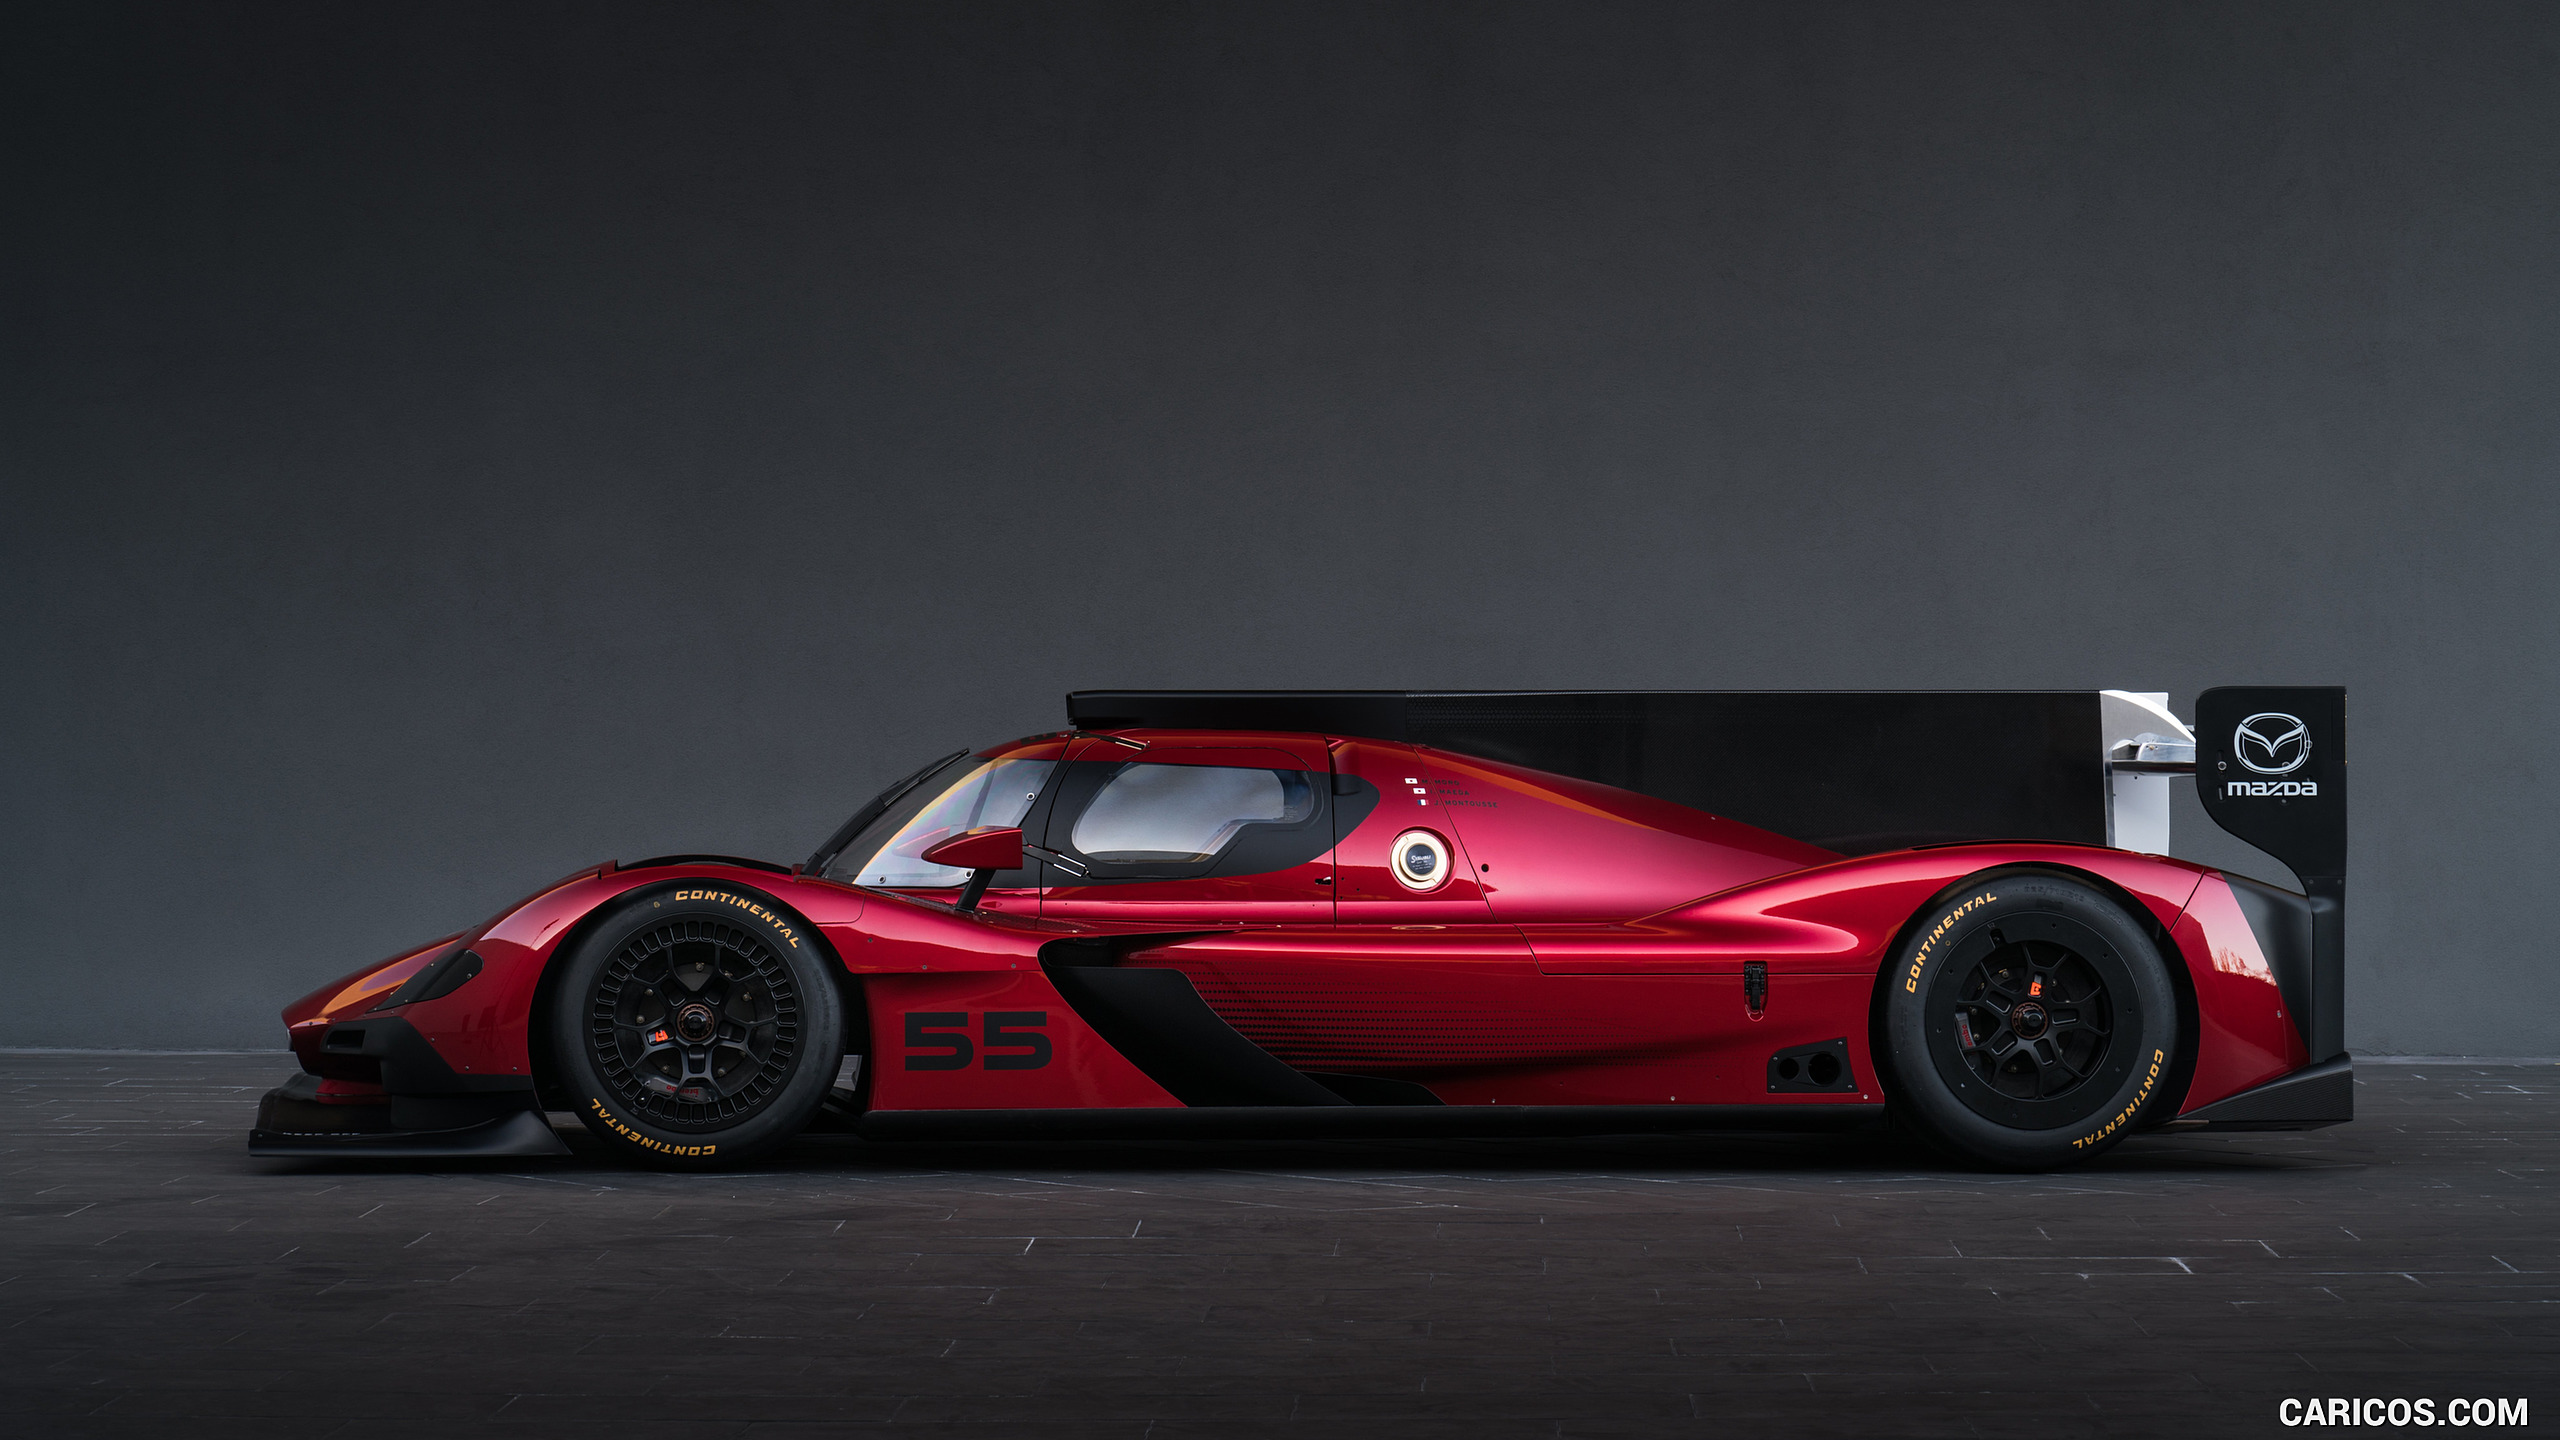 2016 Mazda RT24-P Race Car Concept - Side, #4 of 9